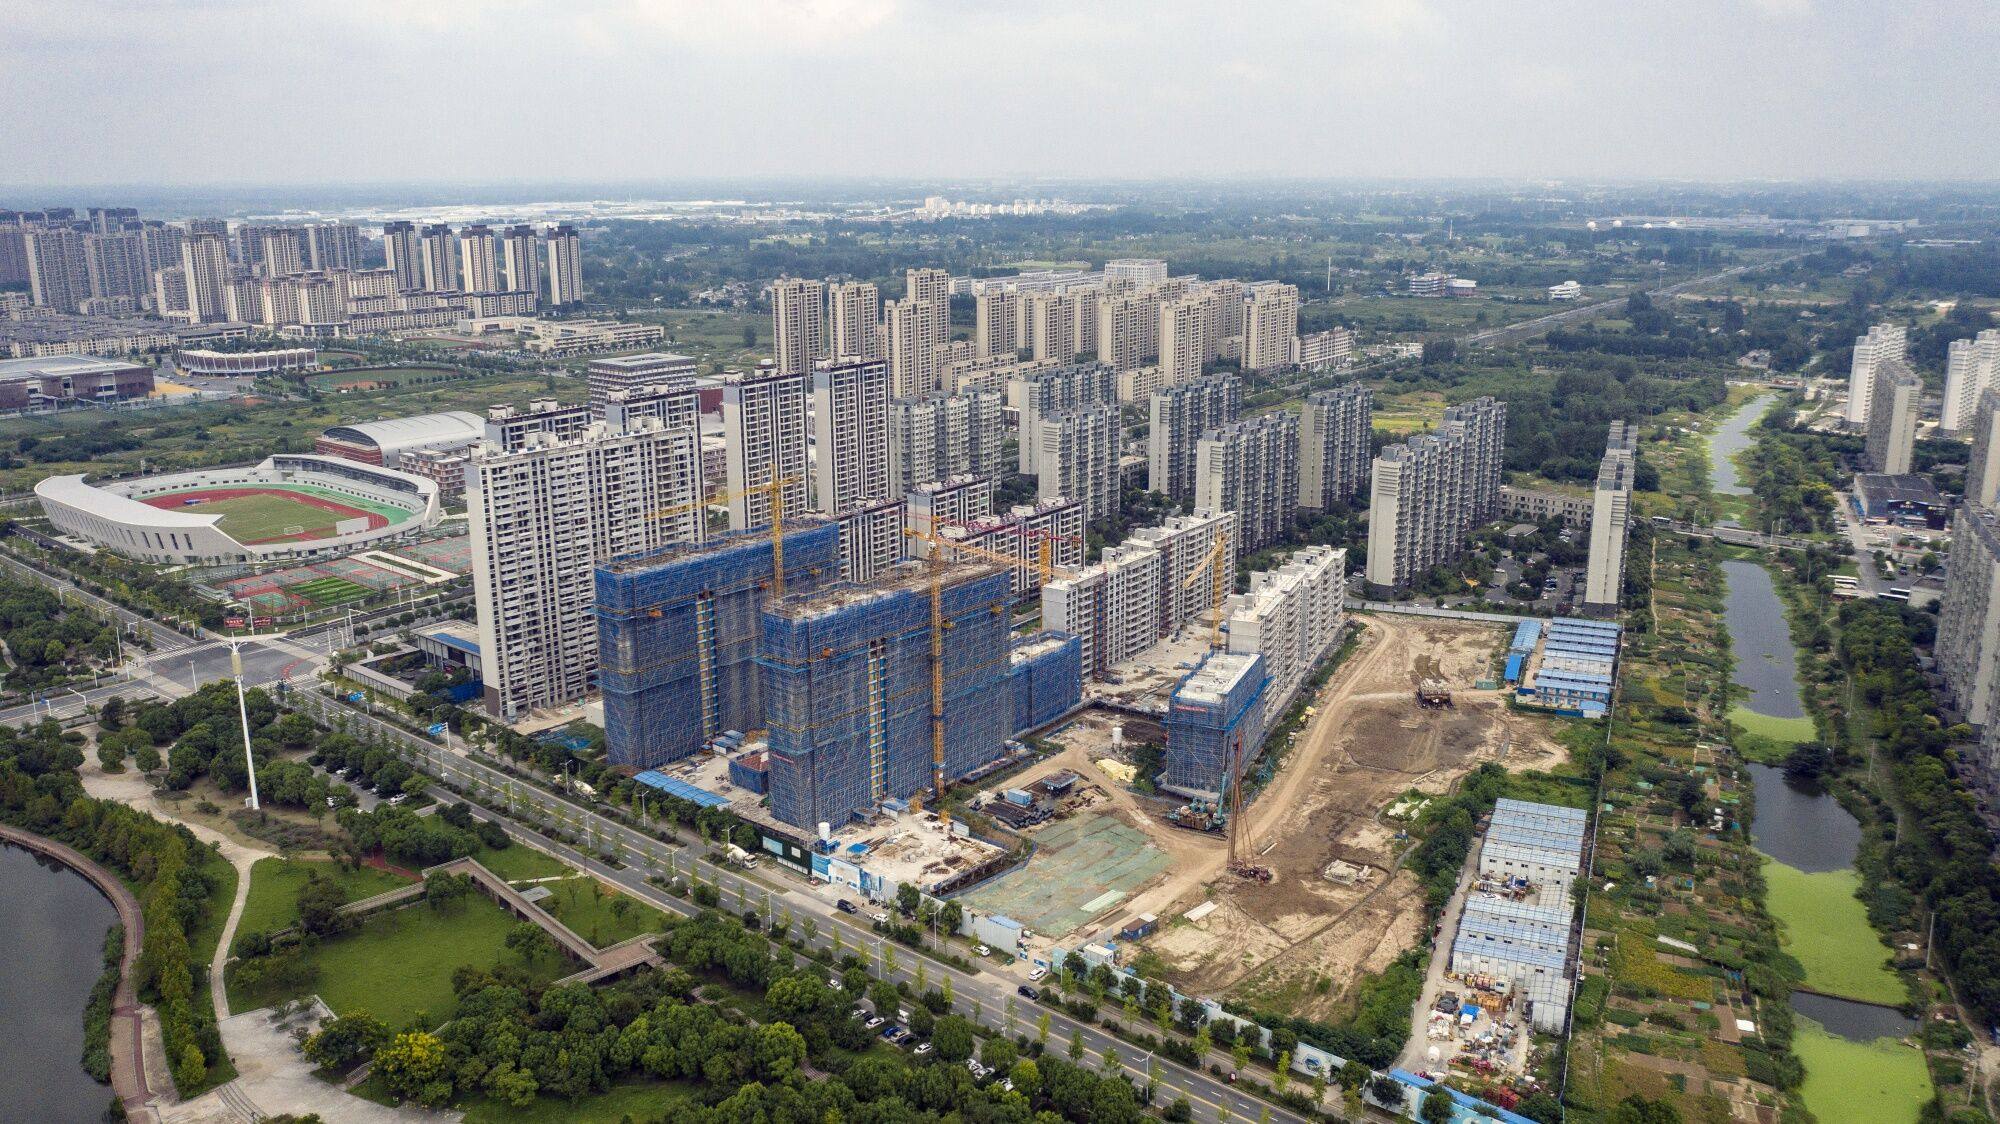 Residential buildings in Yangzhou. China’s housing market is struggling from an onslaught of property developer defaults and weak buyer demand. Photo: Bloomberg